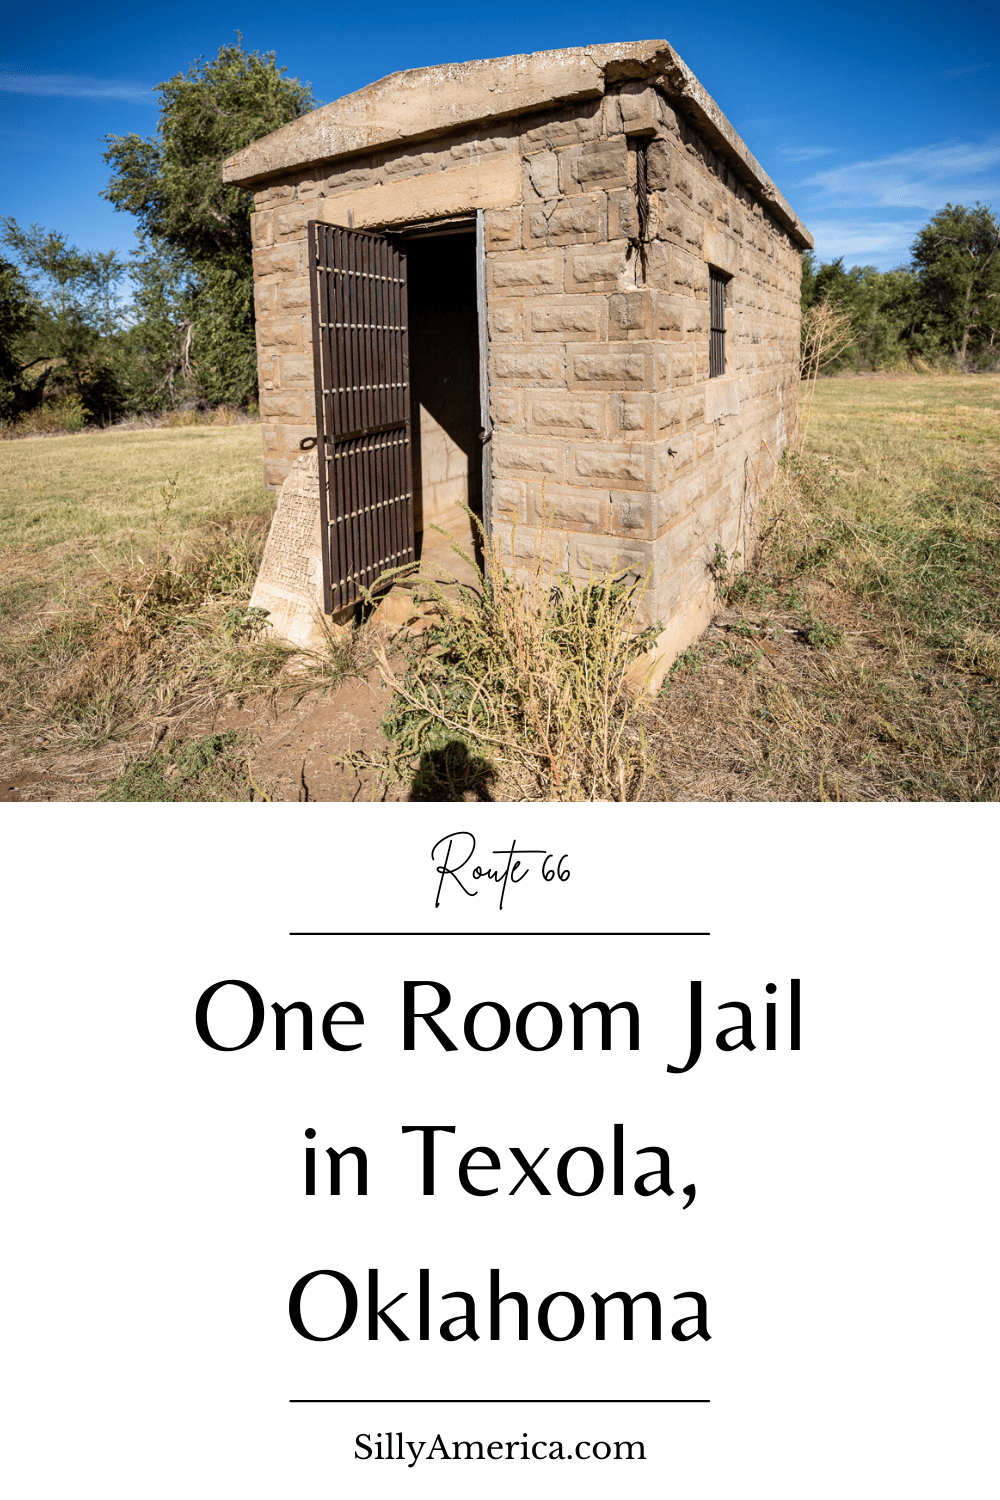 On most road trips you probably try to avoid going to jail. But when traveling on Route 66, you might just want to seek this one out: the One Room Jail in Texola, Oklahoma.  #RoadTrips #RoadTripStop #Route66 #Route66RoadTrip #OklahomaRoute66 #Oklahoma #OklahomaRoadTrip #OklahomaRoadsideAttractions #RoadsideAttractions #RoadsideAttraction #RoadsideAmerica #RoadTrip